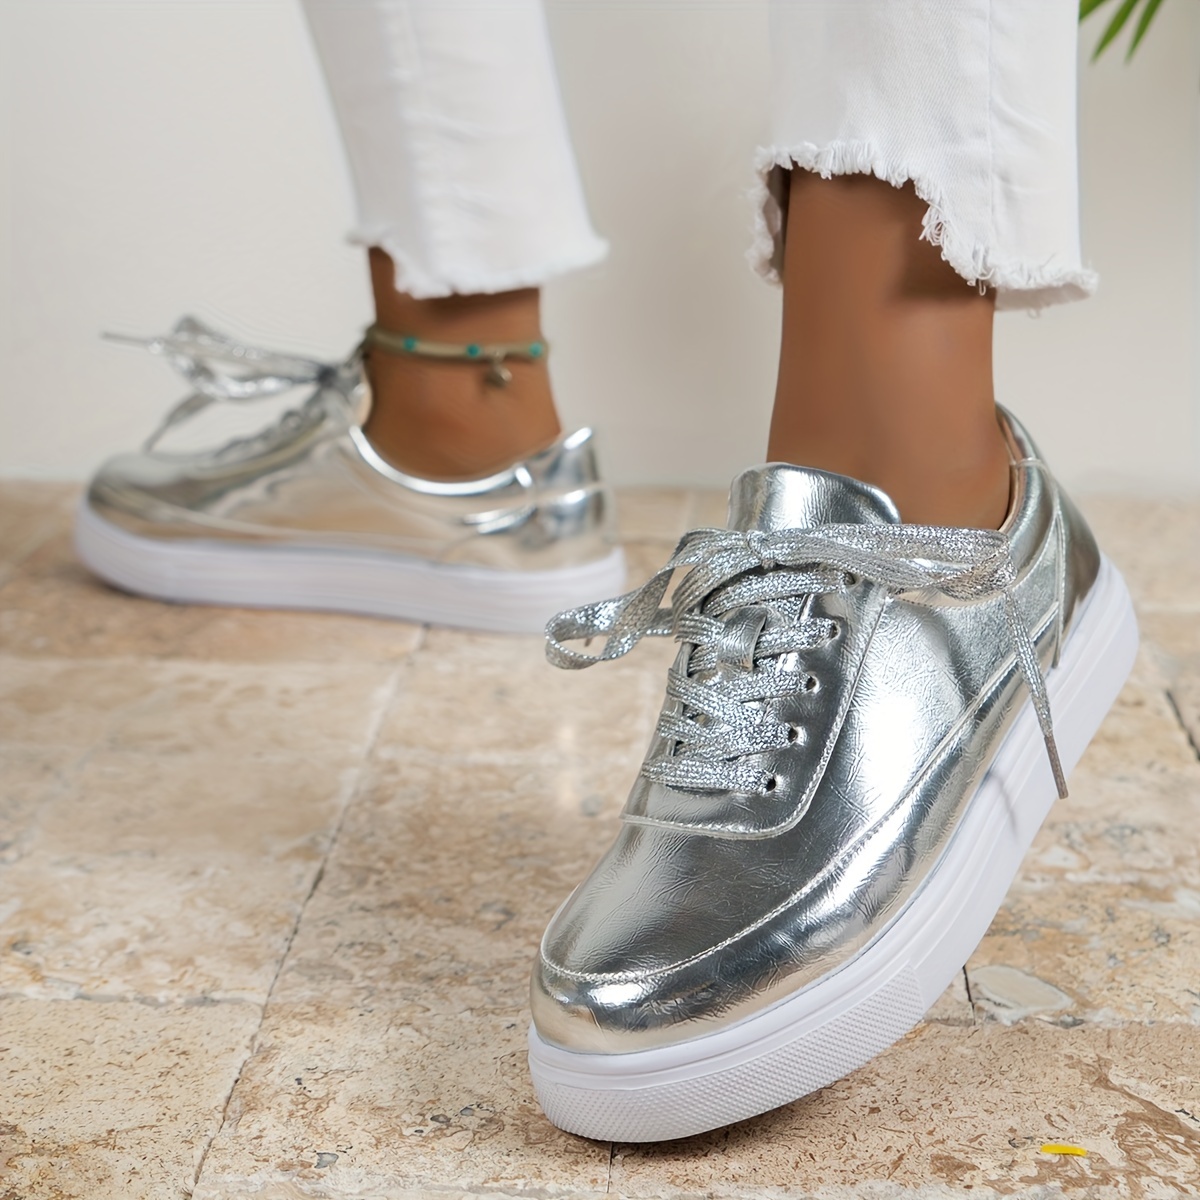 Women's Solid Color Casual Sneakers, Lace Up Low-top Patent Leather Casual  Platform Trainers, Versatile Comfy Daily Shoes